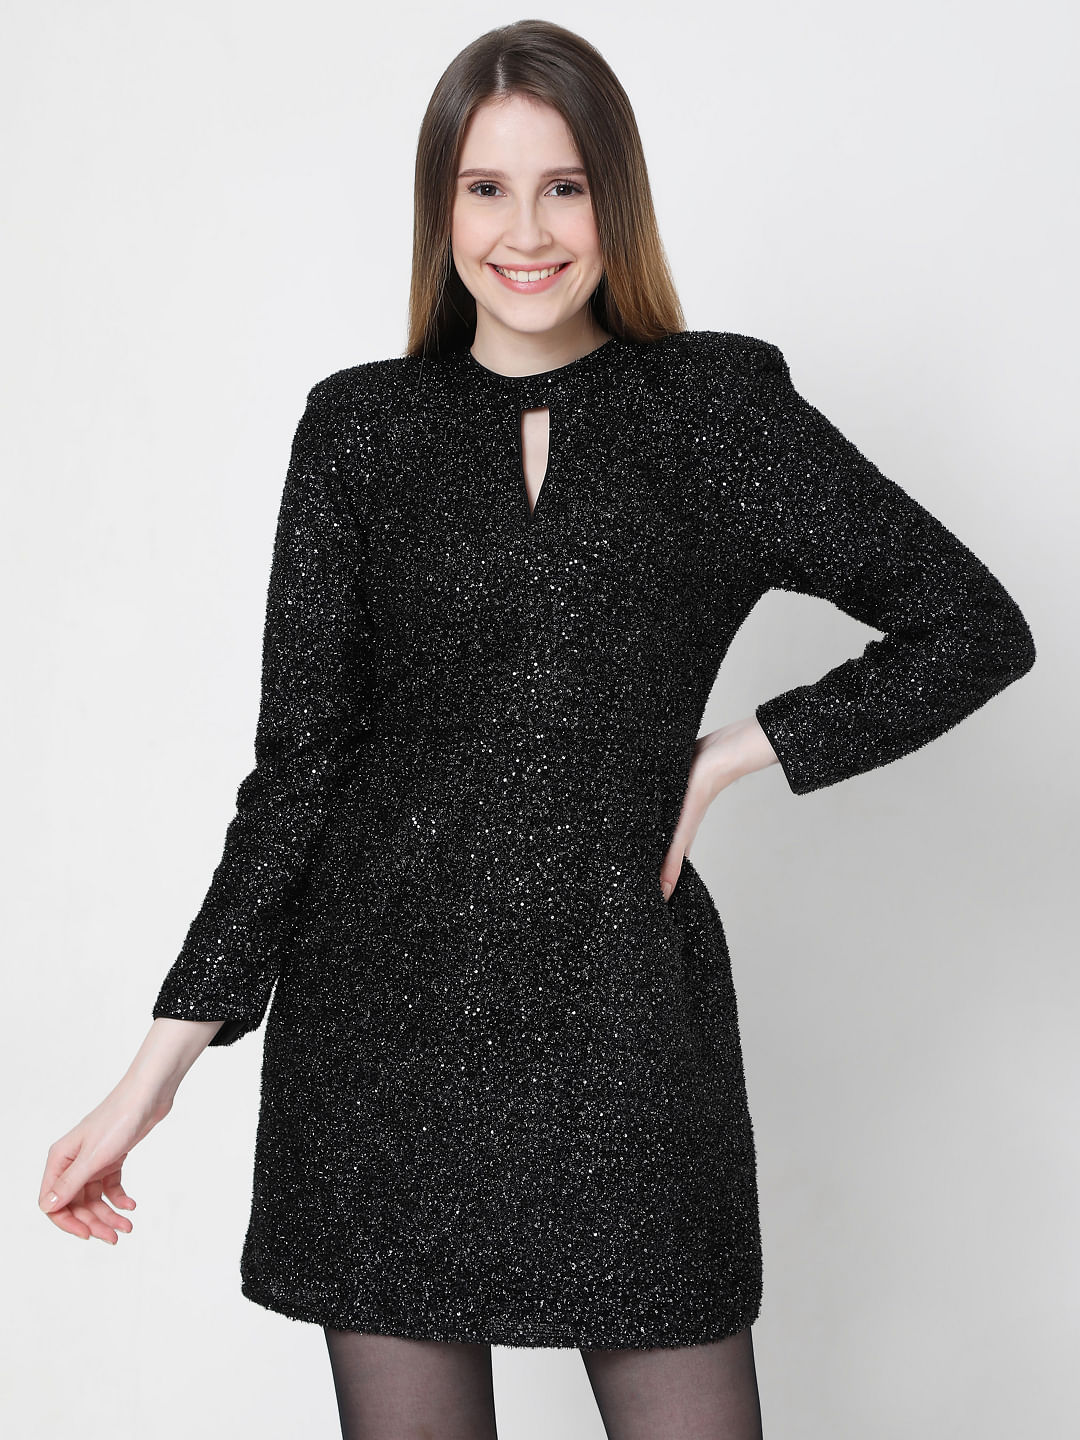 Bodycon Sequin Dresses for Women Long Sleeve Crewneck Short Mini Dress  Sparkly Glitter Elegant Evening Club Party Gown at Amazon Women's Clothing  store